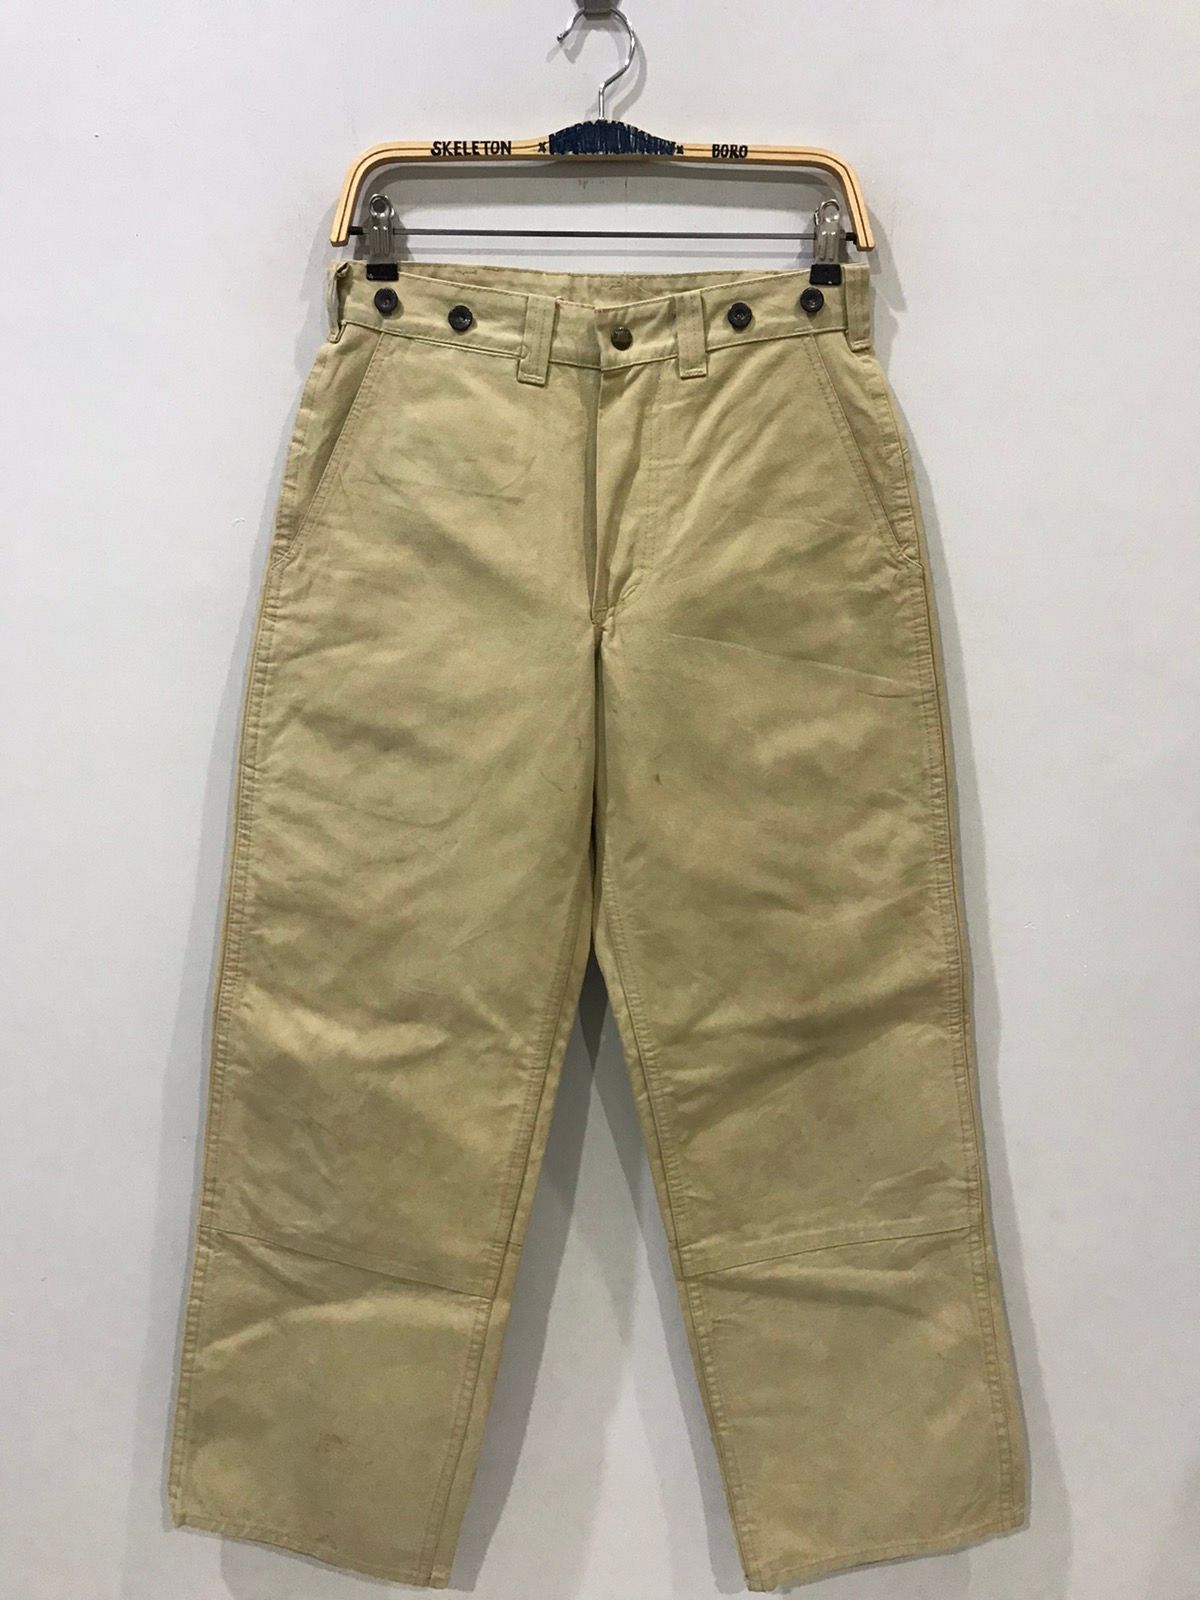 Vintage FILSON Made in USA Military Sturdy Pant - 2